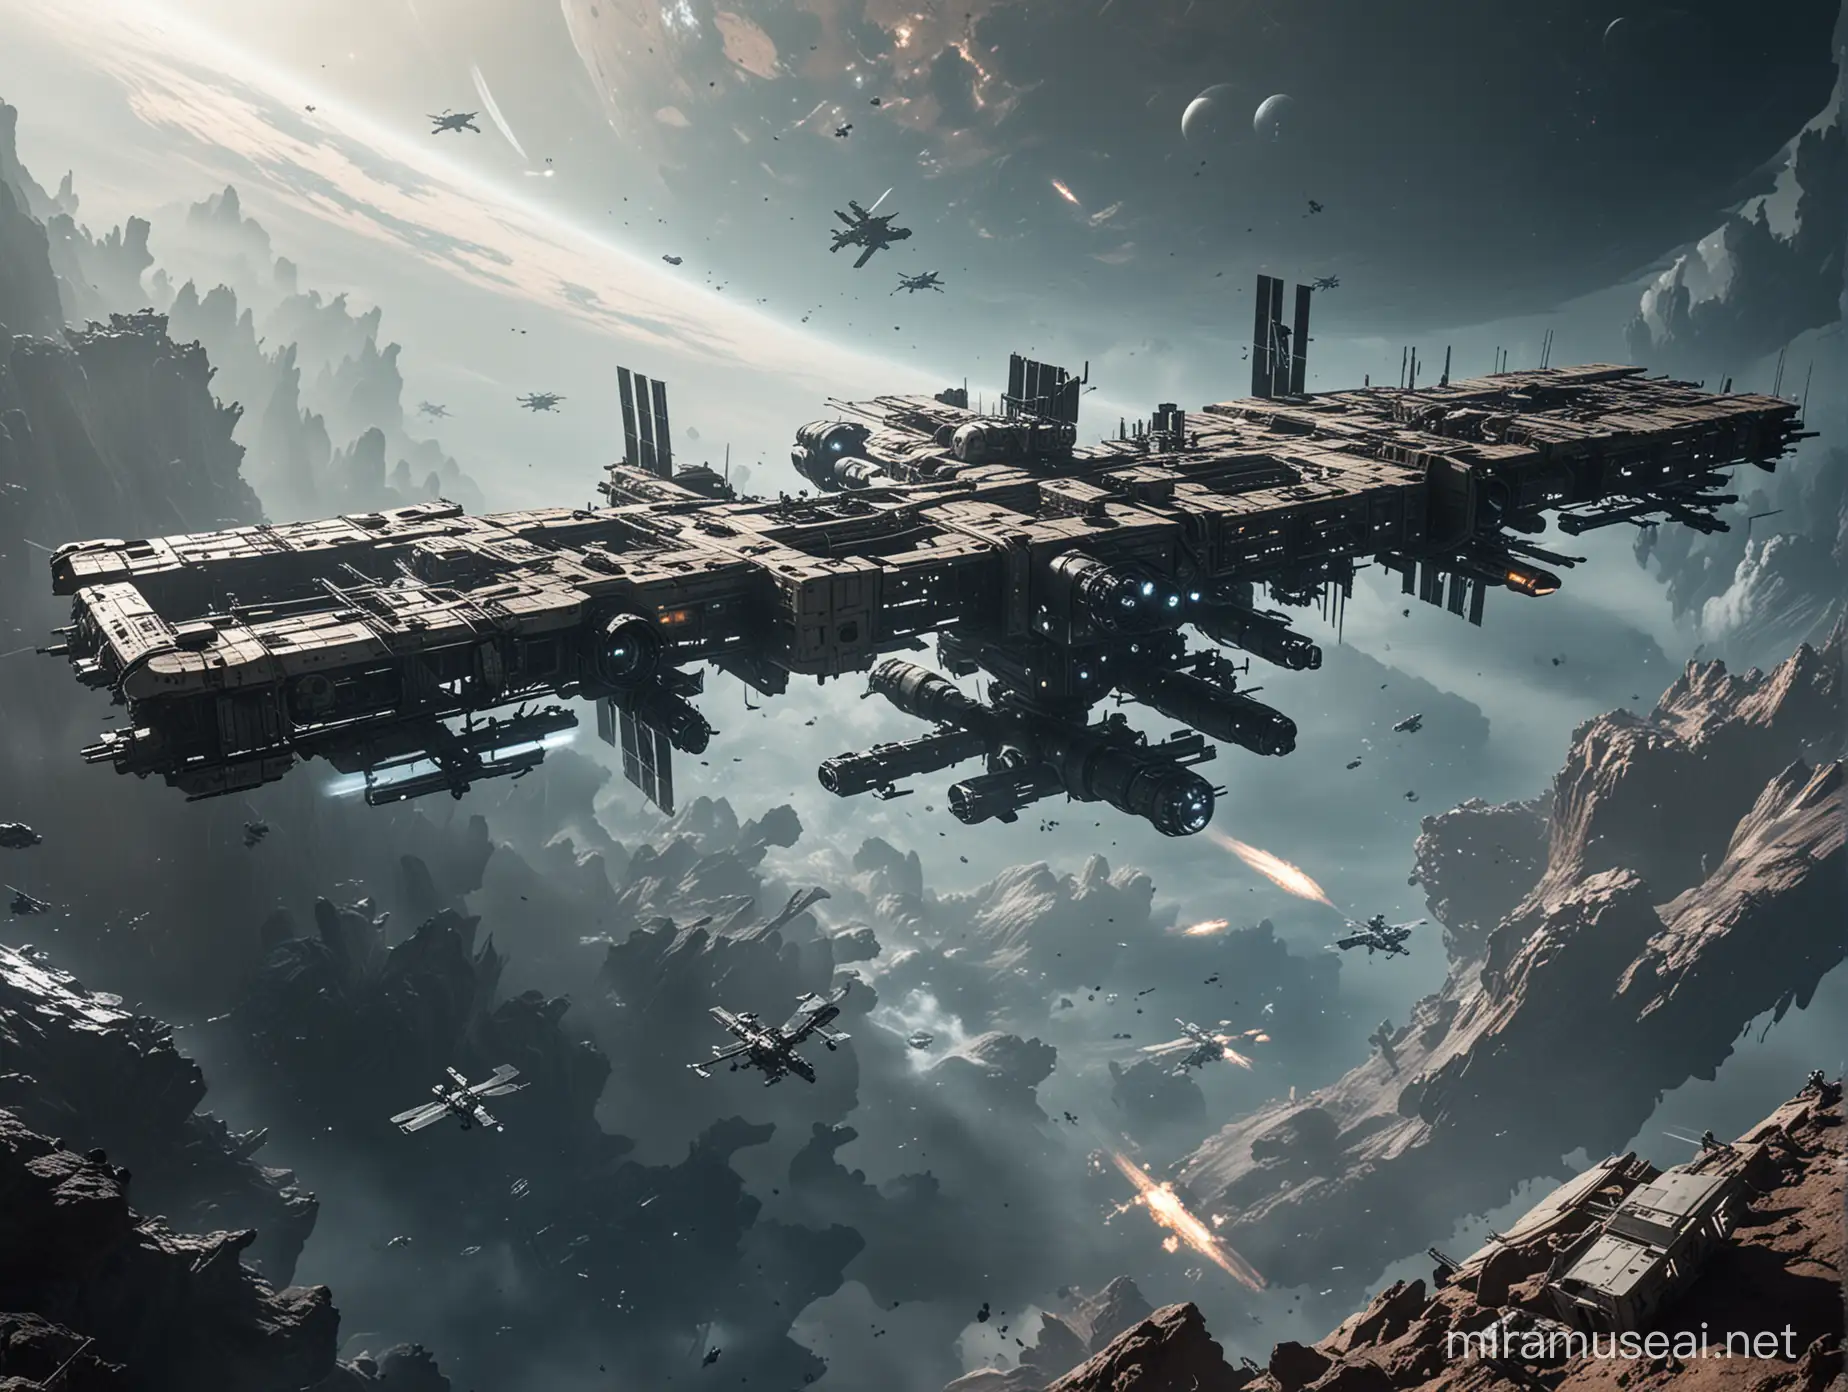 Photo of ISS space station in middle of a battle between aliens and humans, atmospheric perspective, roof visible, Sci-fi, future military, futuristic, post-apocalyptic, space station.